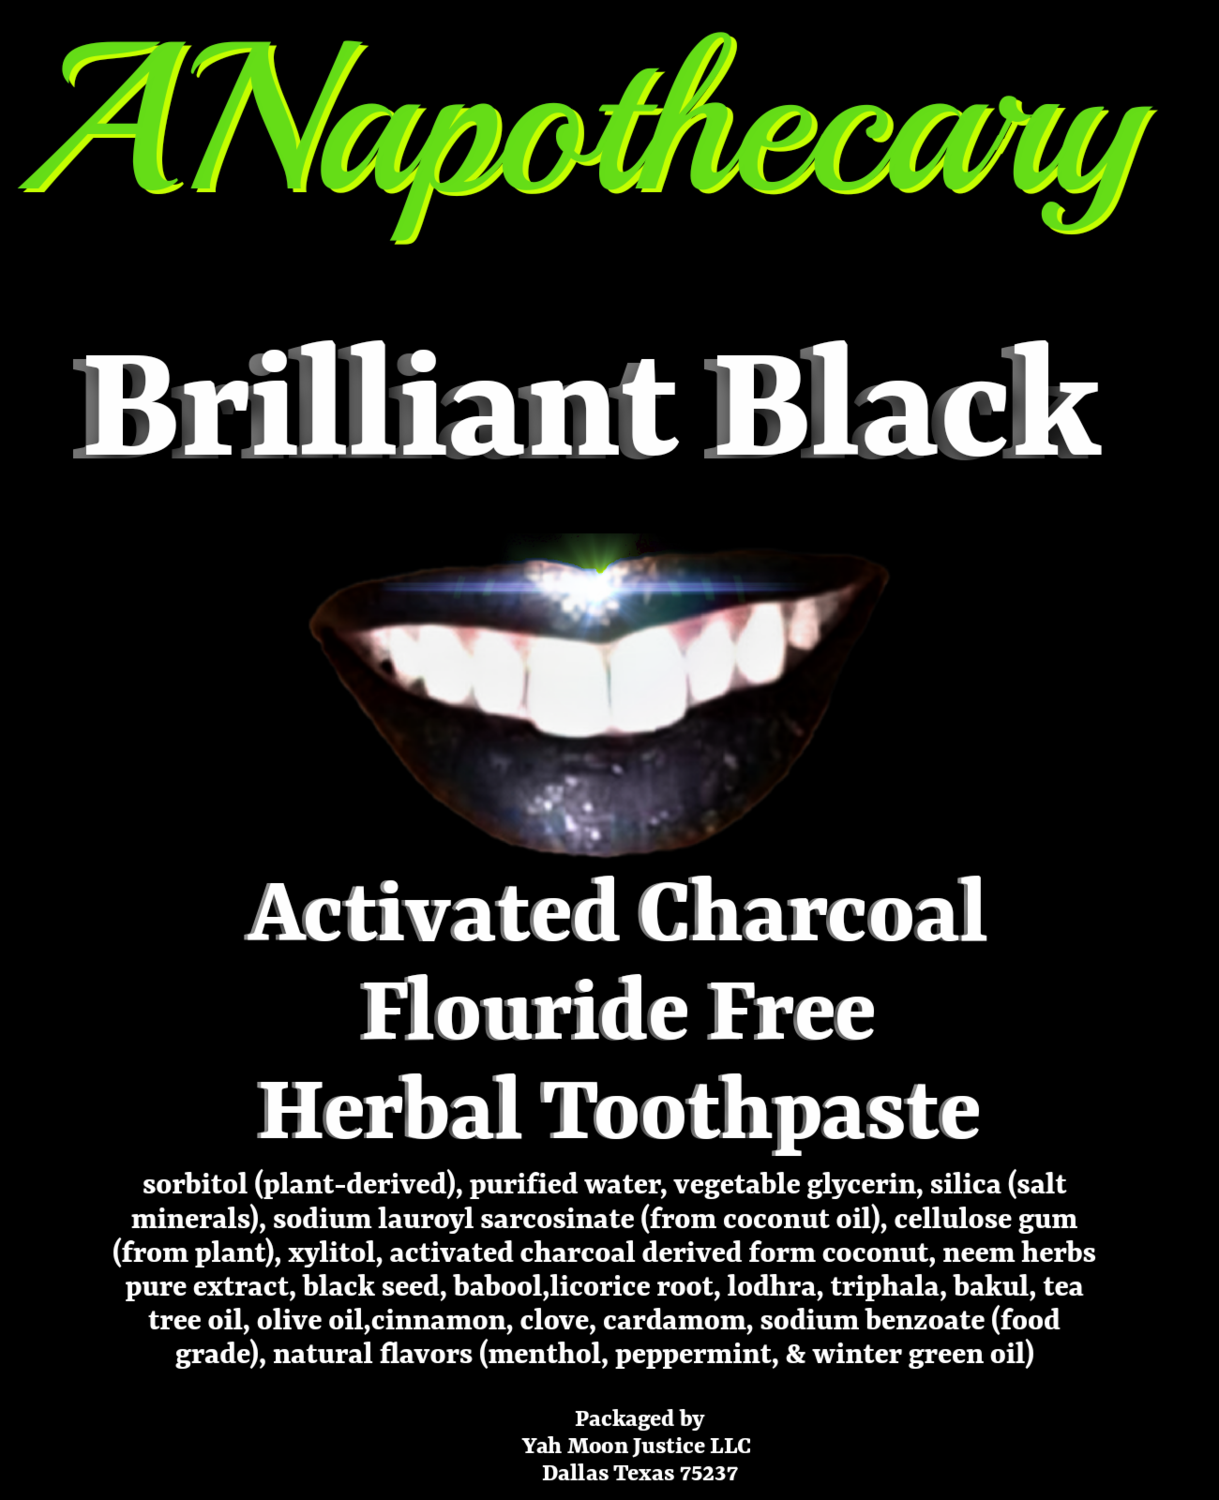 Brilliant Black Flouride Free Activated Charcoal Toothpaste